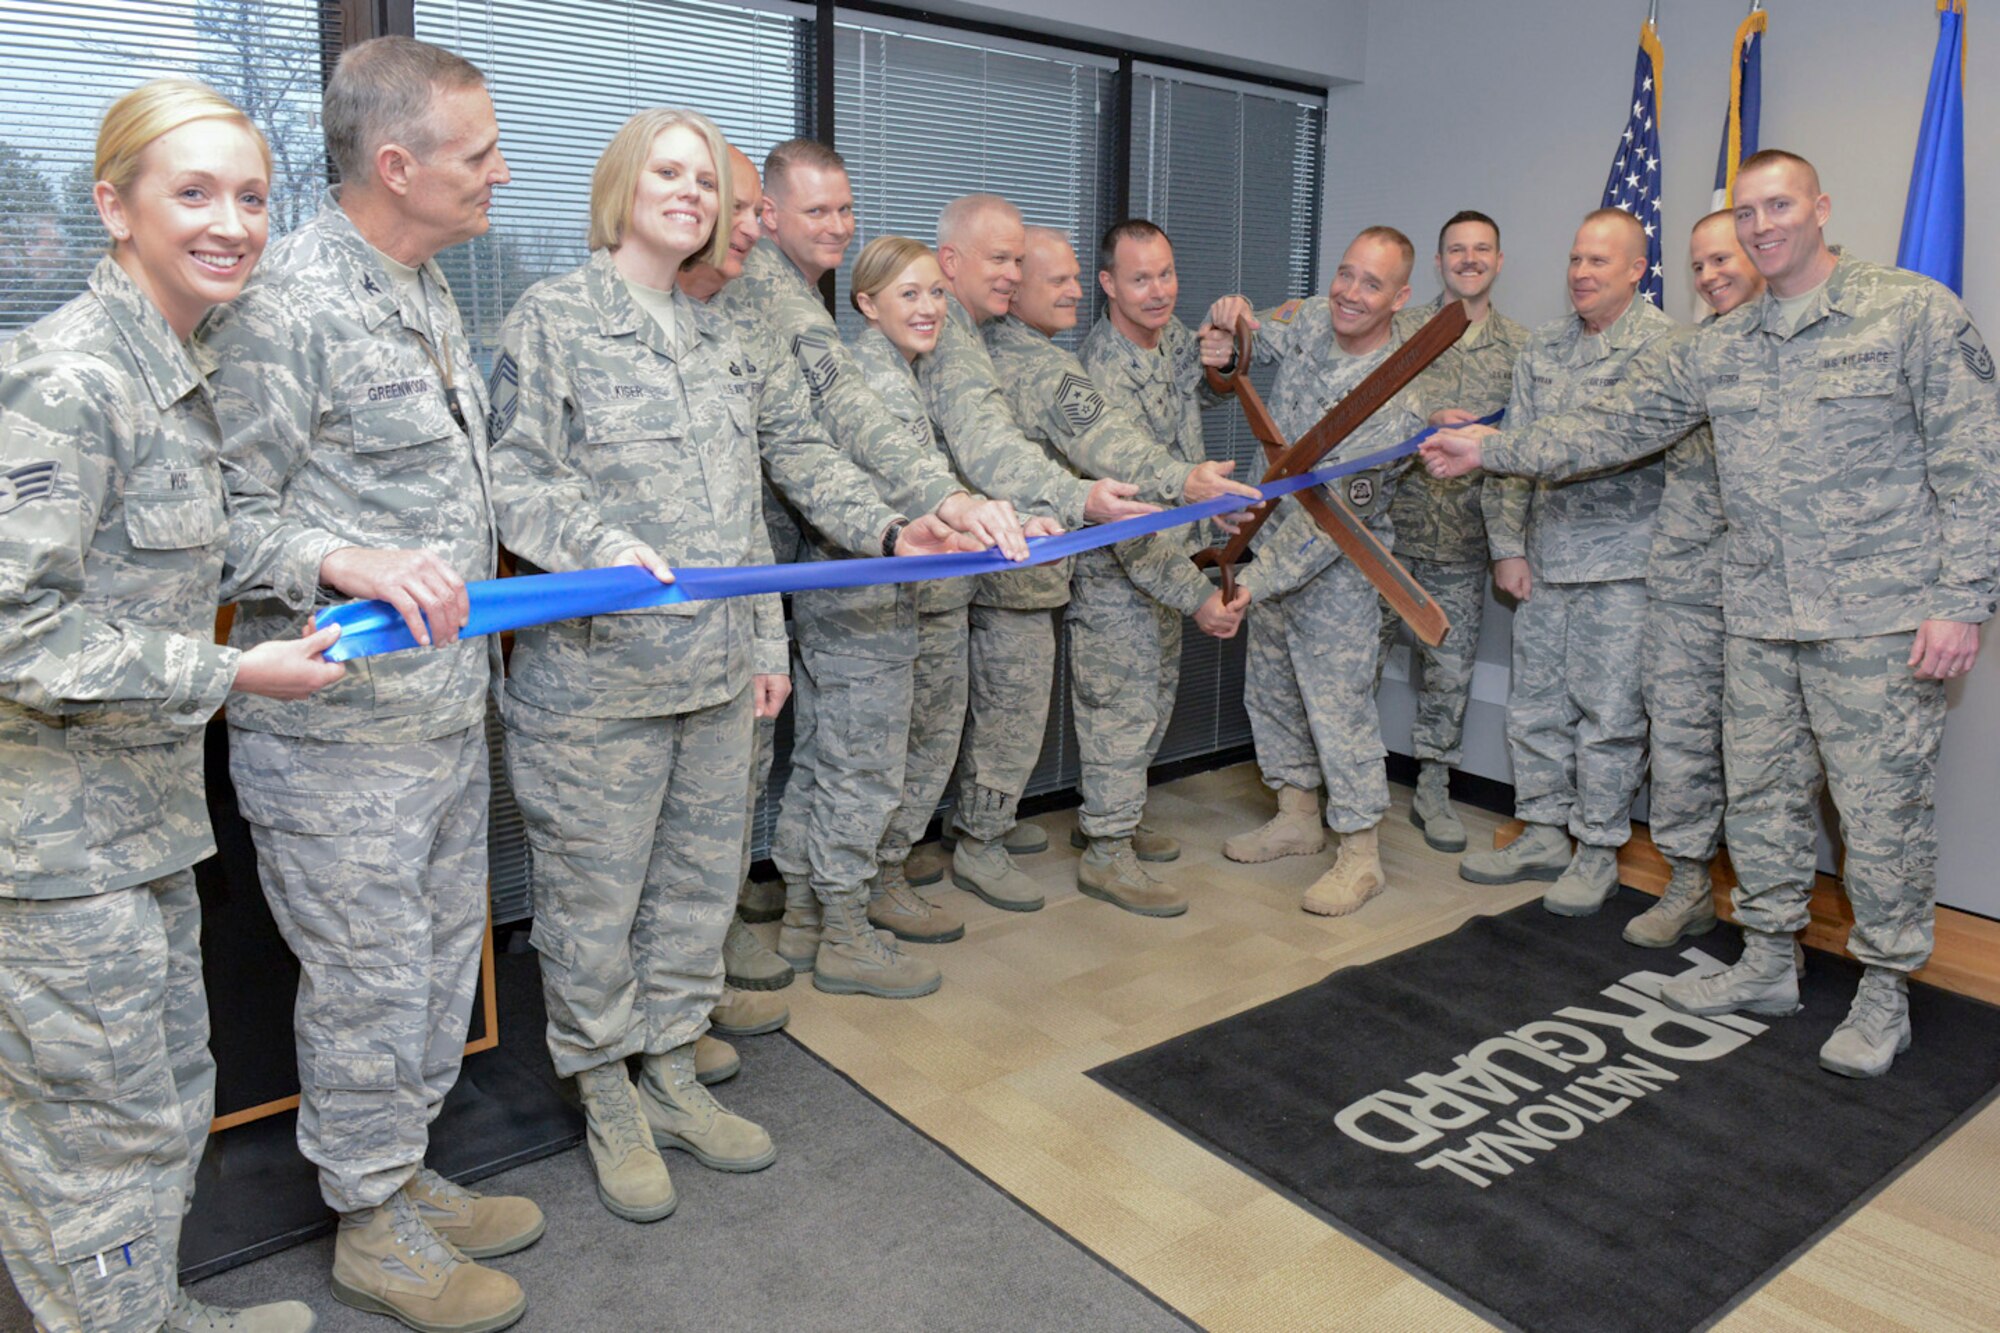 The Adjutant General of the Iowa National Guard, Maj. Gen. Timothy Orr (scissors, right), and 132d Wing (132WG) Commander, Col. Kevin Heer (scissors, left), cut the ribbon as members of the Iowa Air and Army National Guard celebrate the opening of the 132WG, Des Moines, Iowa off-site Recruiting Operation Center during a ribbon cutting ceremony held at the new Recruiting Operation Center in West Des Moines, Iowa on Tuesday, March 24, 2015.  Leaders of the Iowa National Guard, leaders of the 132WG and members of the 132WG Force Support Squadron hold the ribbon as it is being cut.  (U.S. Air National Guard photo by Staff Sgt. Linda K. Burger/Released)